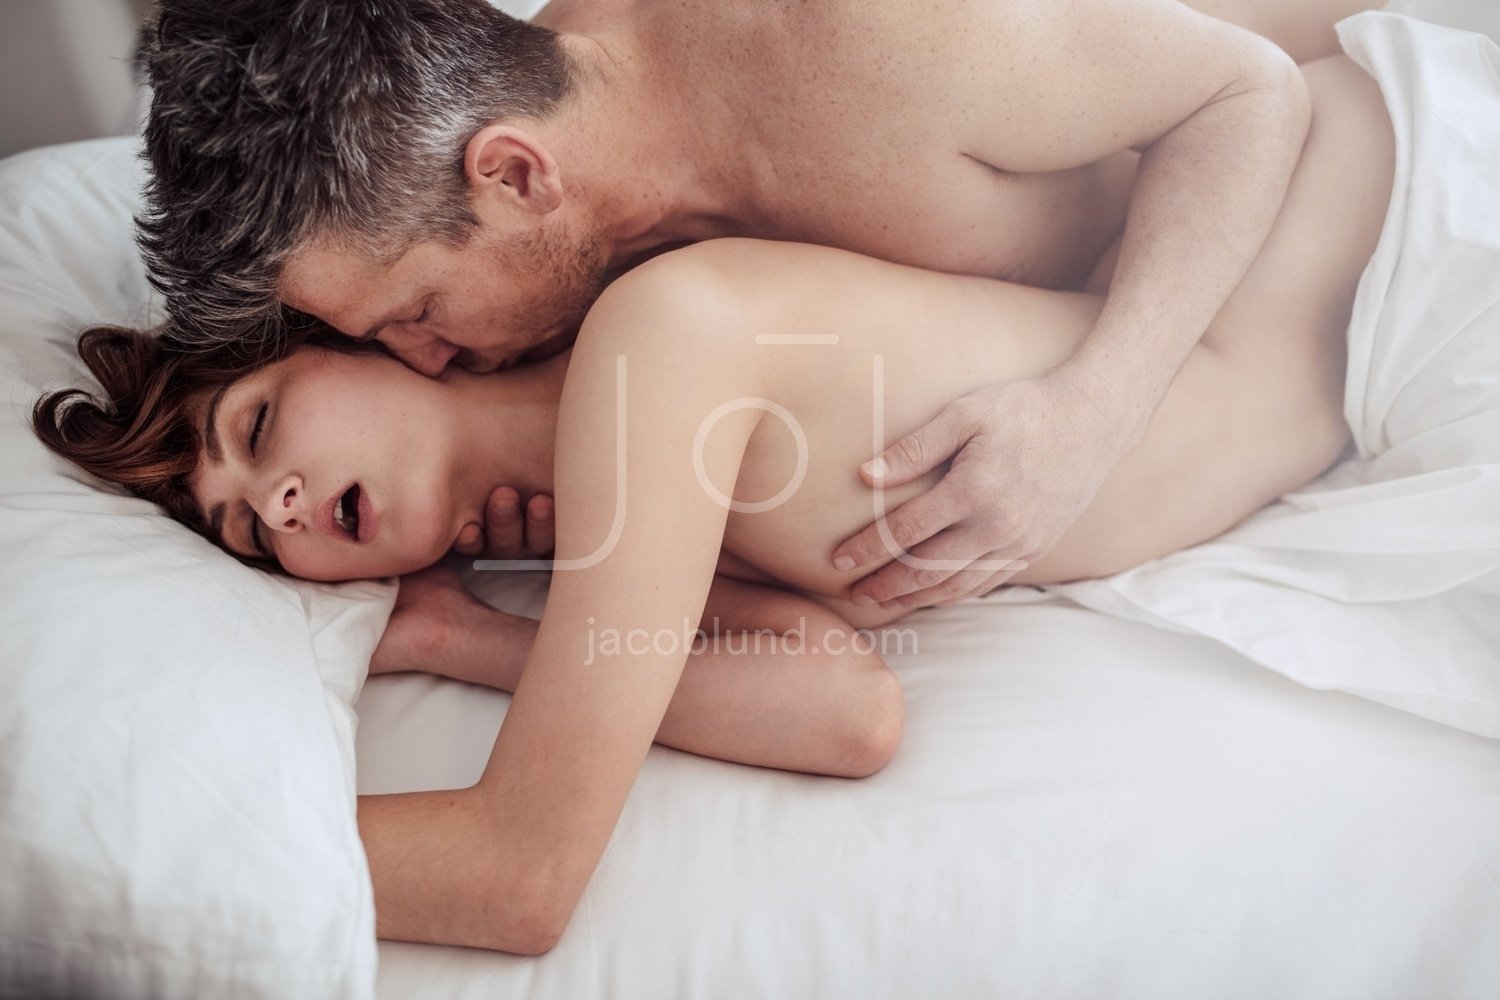 Man and woman in bed having intimate